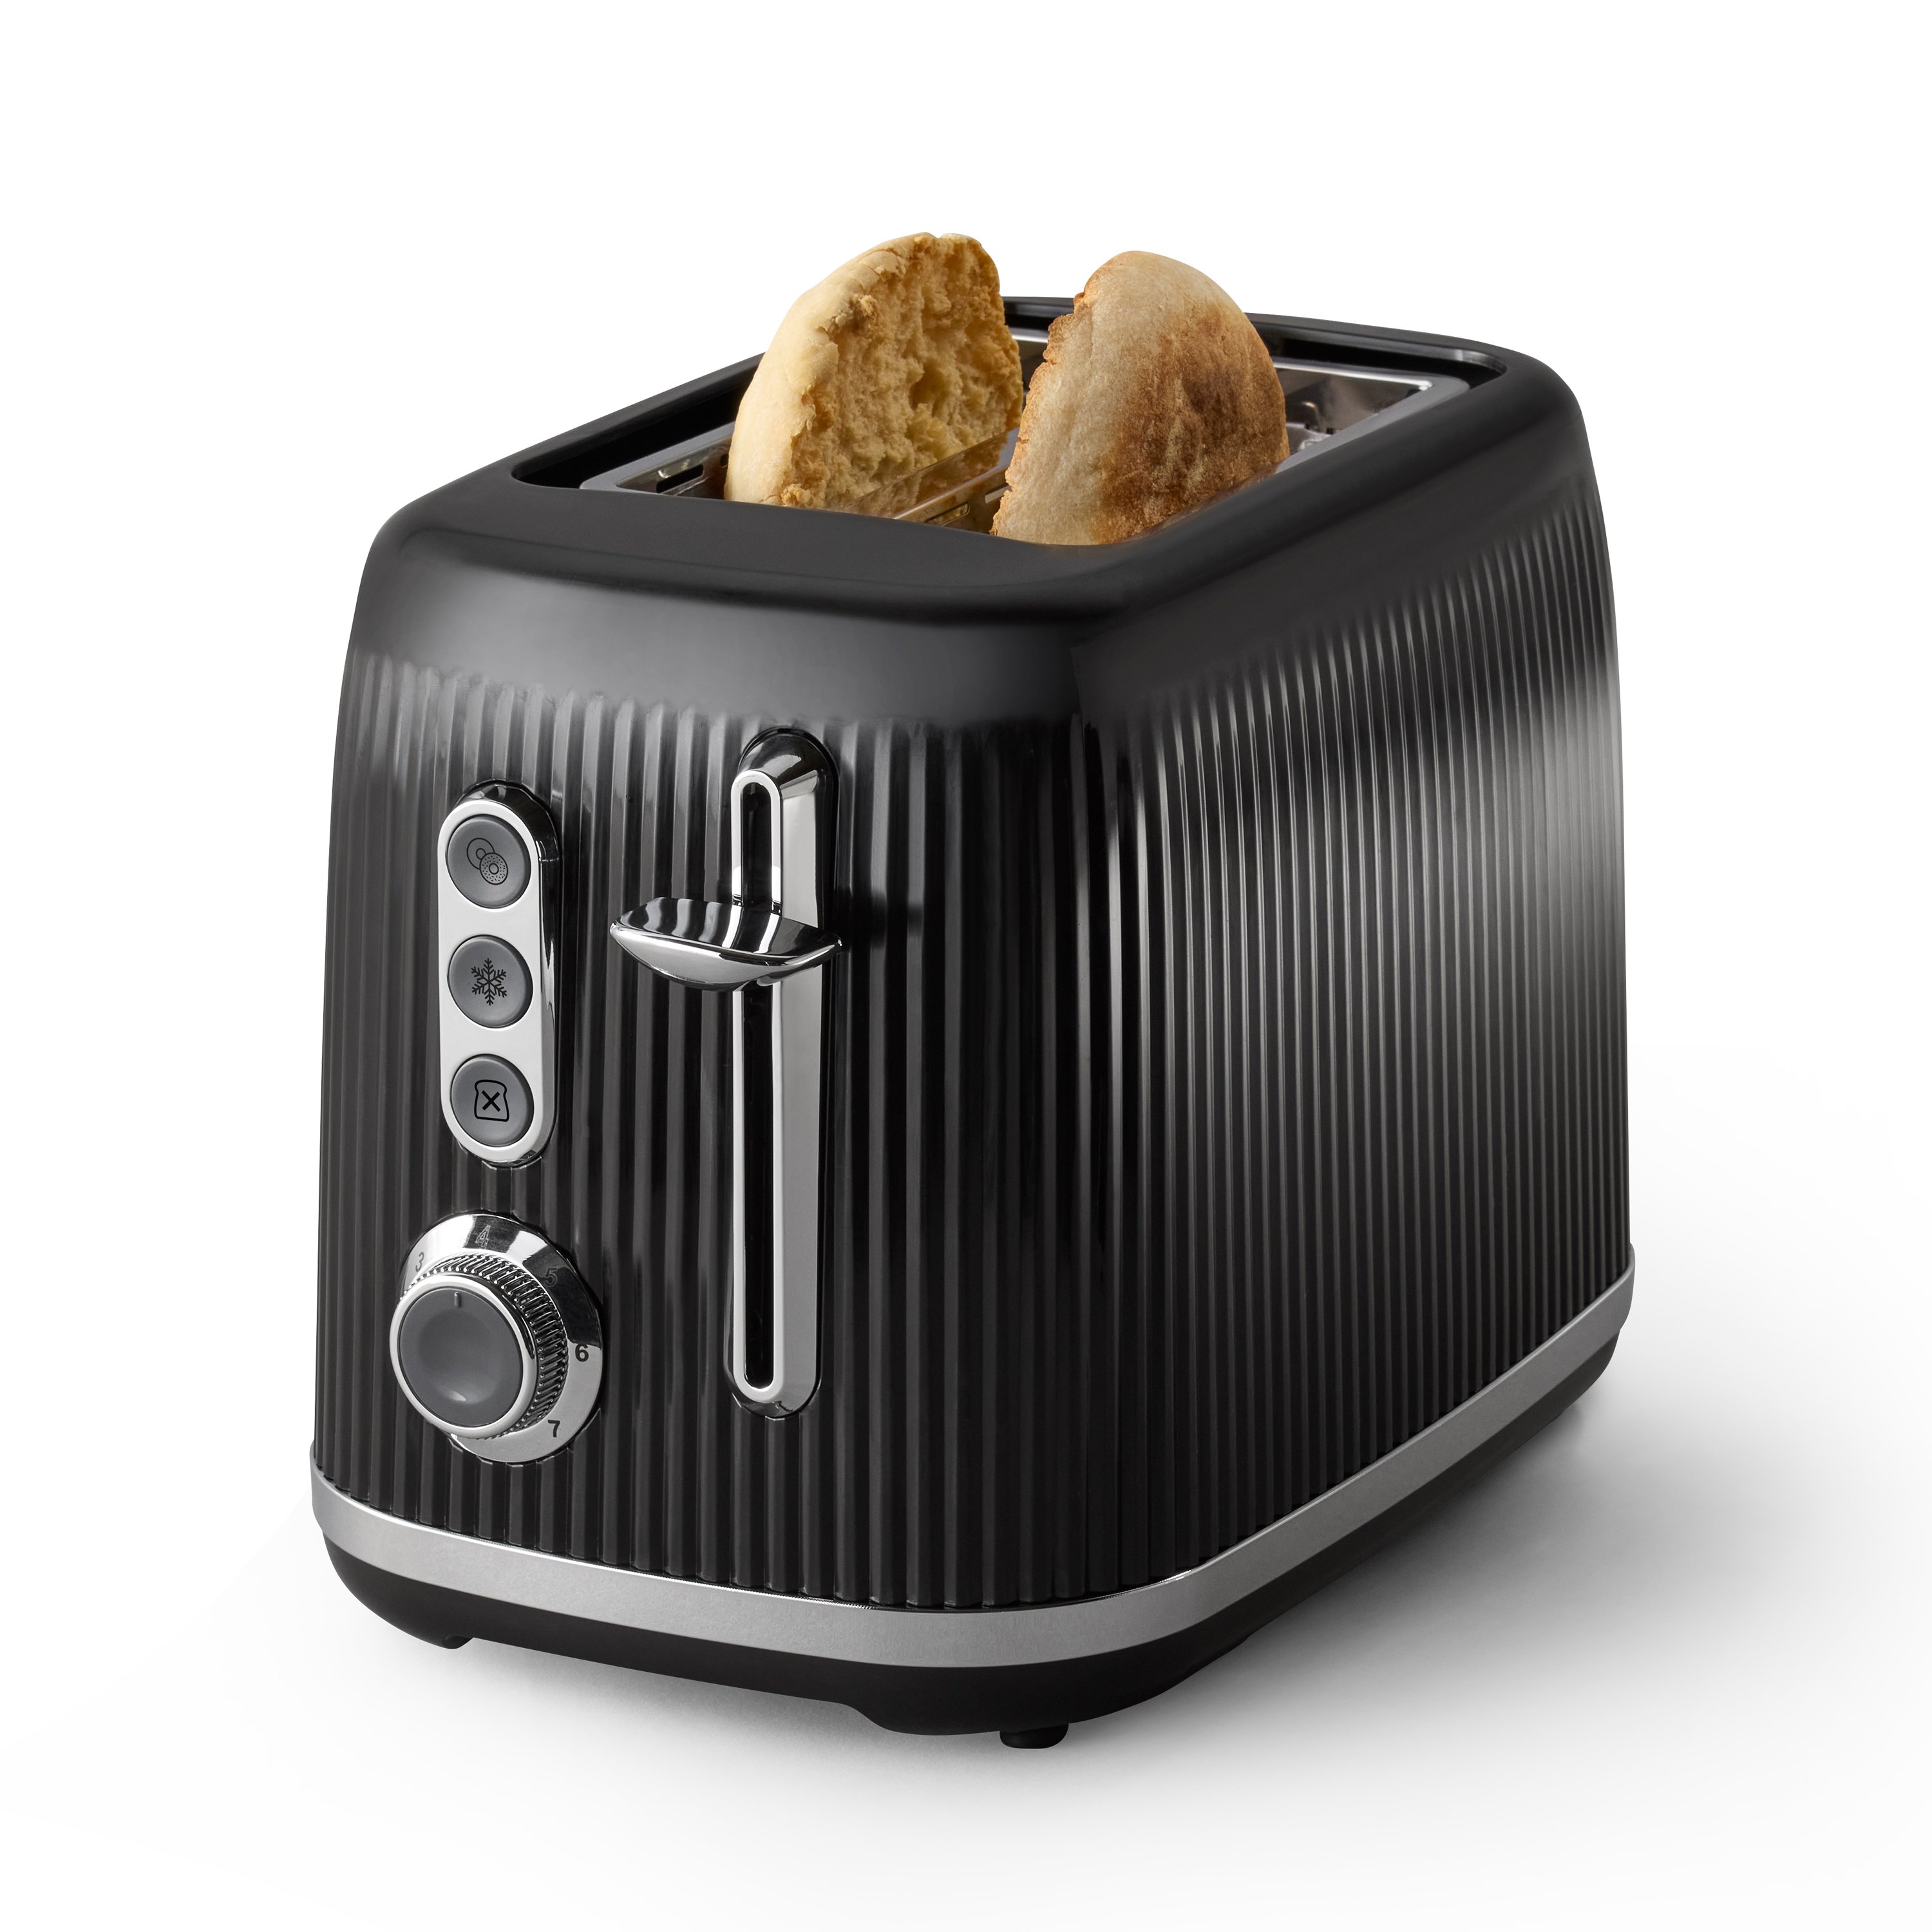 https://s7d9.scene7.com/is/image//NewellRubbermaid/DC_31285_Oster_2021_Innovation_C3PO_Toaster_Enhanced_ATF_2155952ATF_1